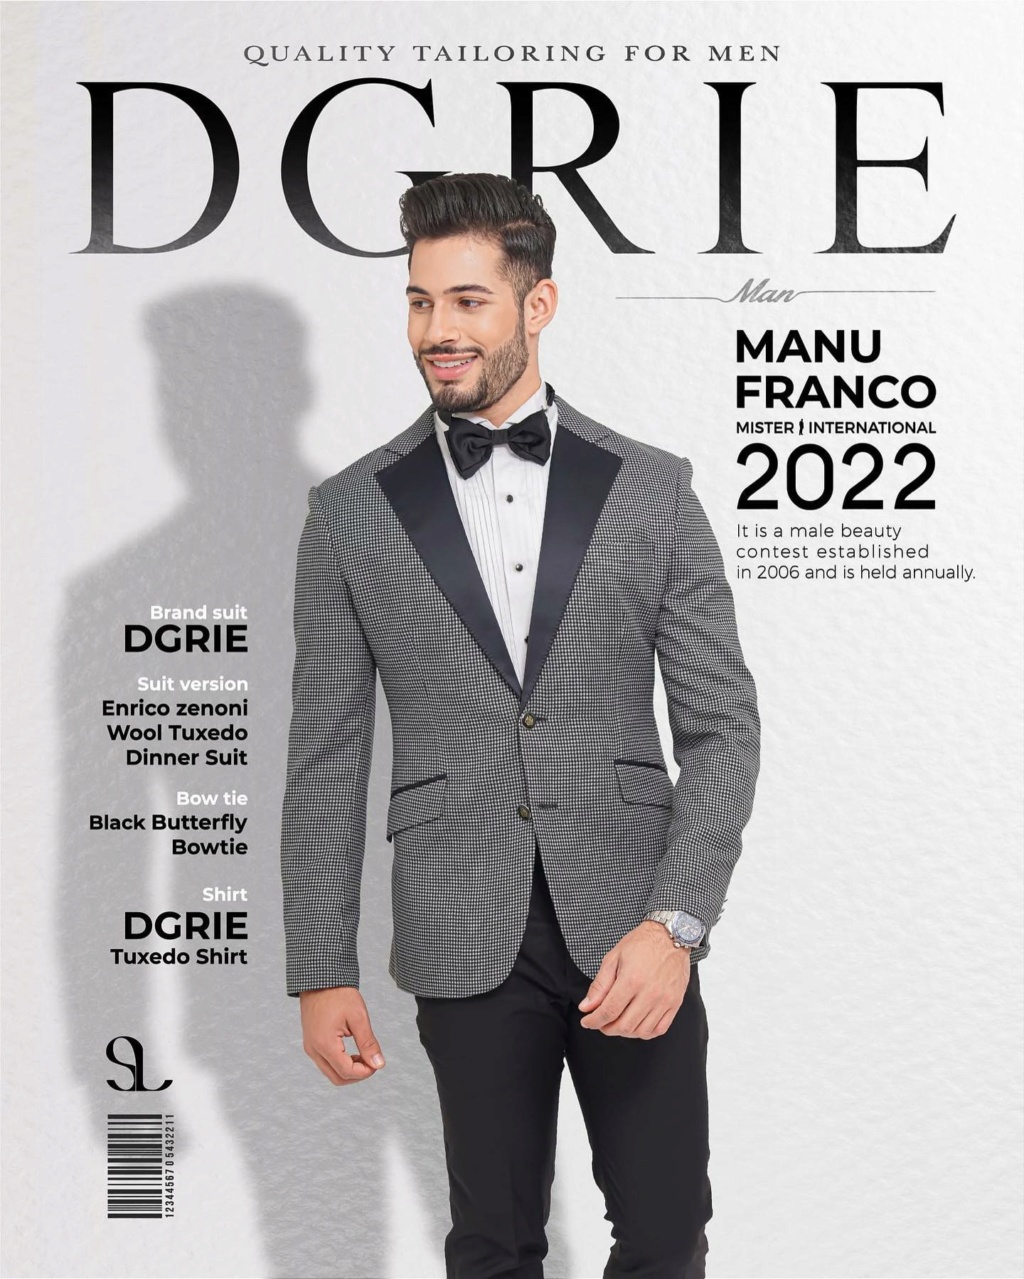 Manuel Franco - MISTER INTERNATIONAL 2022 - Official Thread (DOMINICAN REPUBLIC) Thai Version - Page 3 32904310